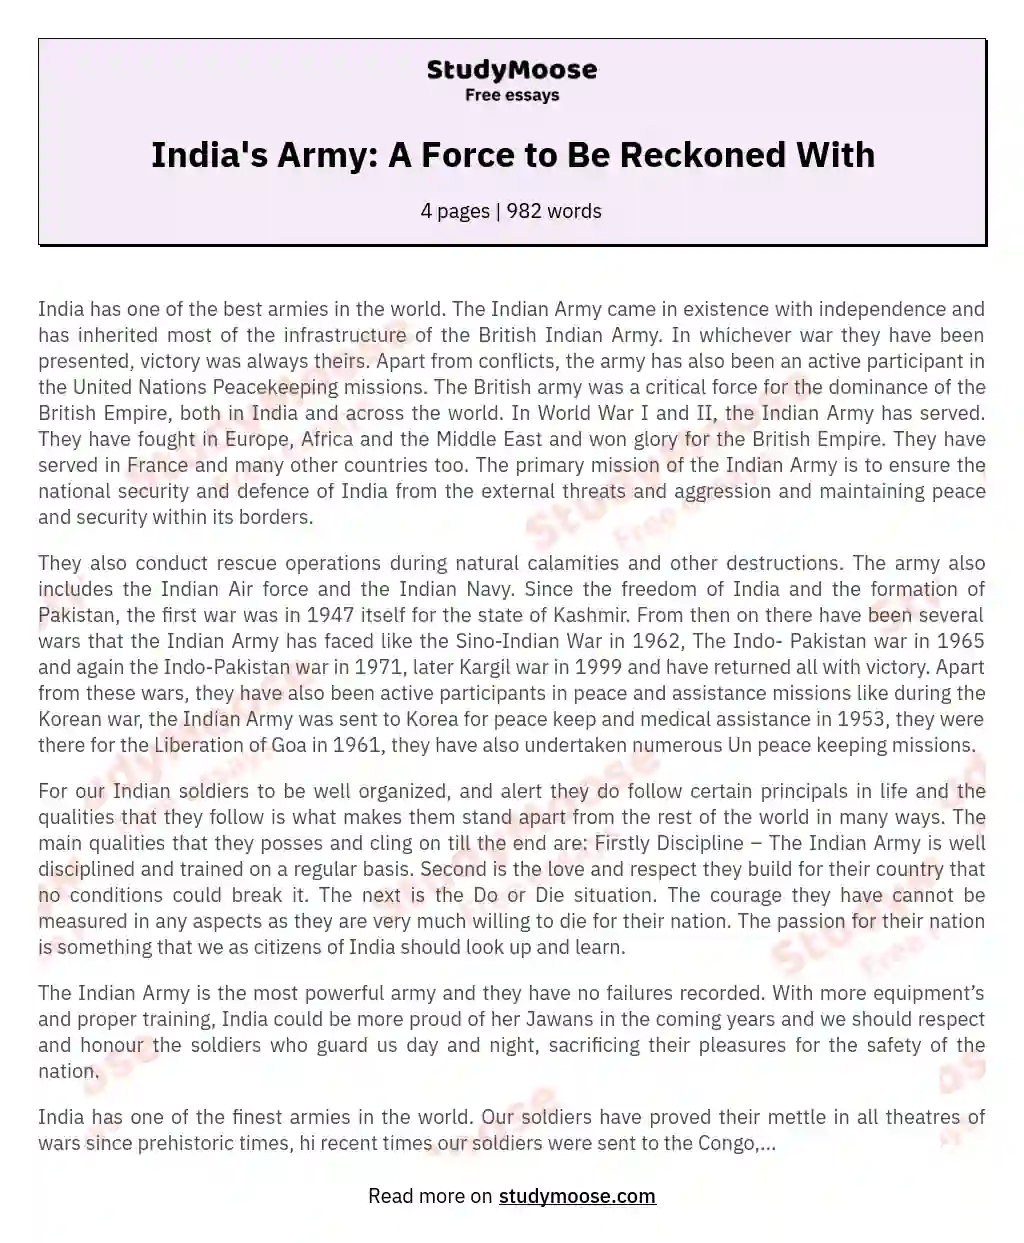 India's Army: A Force to Be Reckoned With essay